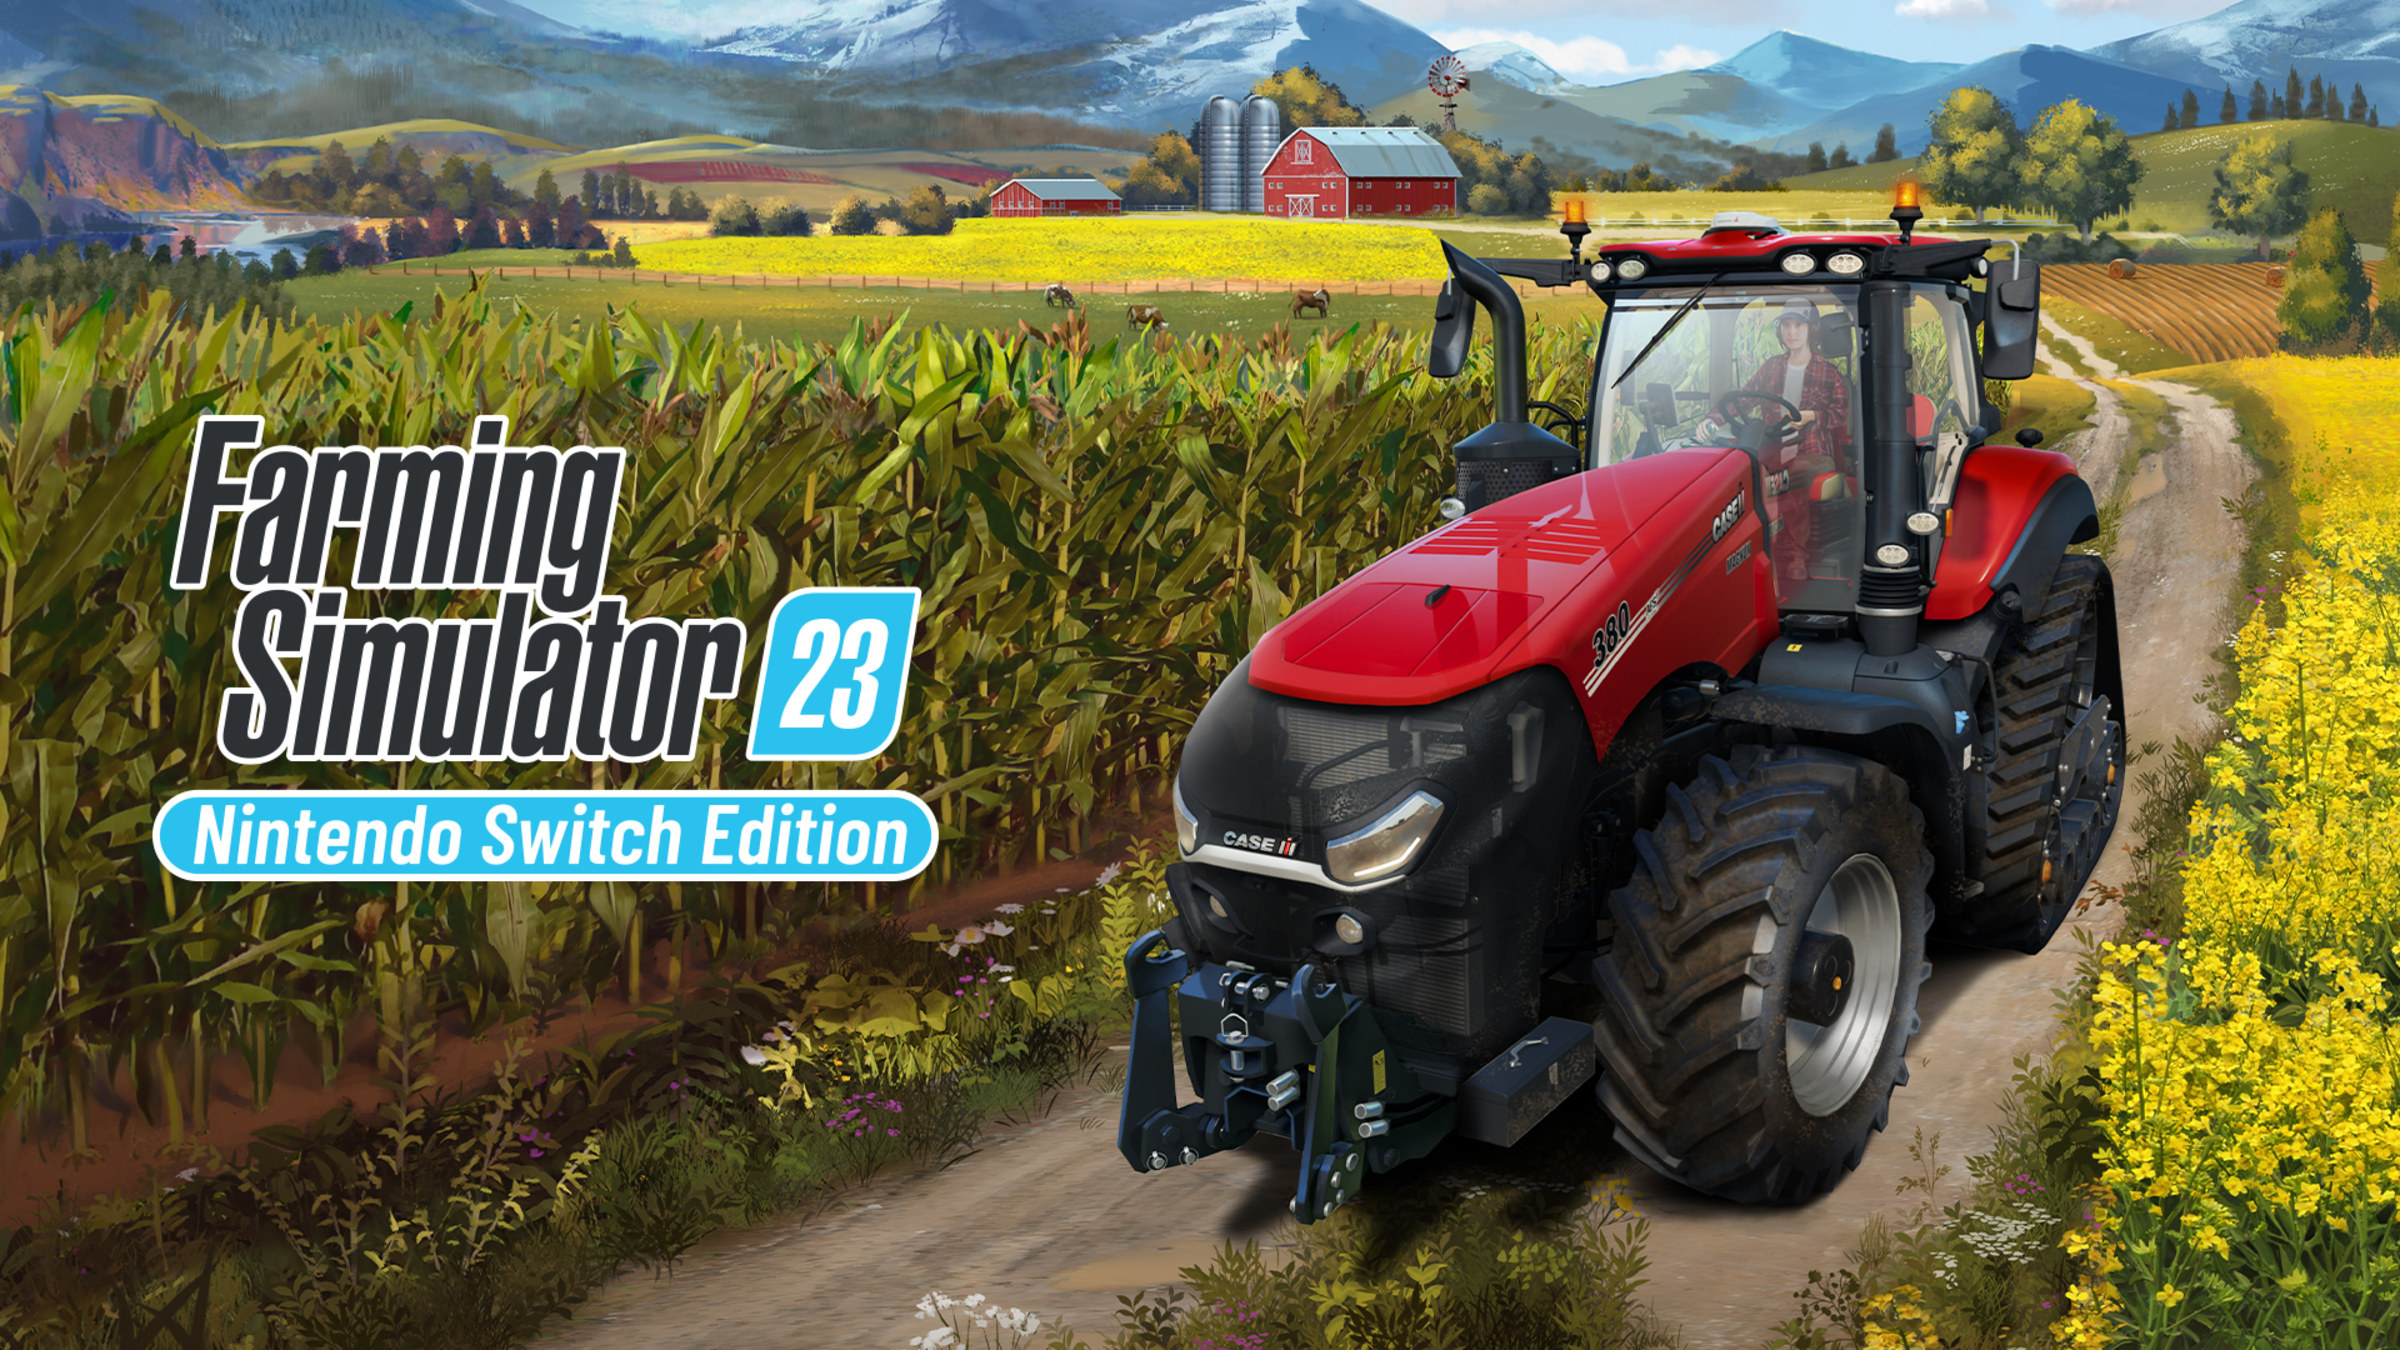 Is Farming Simulator 21 Coming Sooner Than Expected?